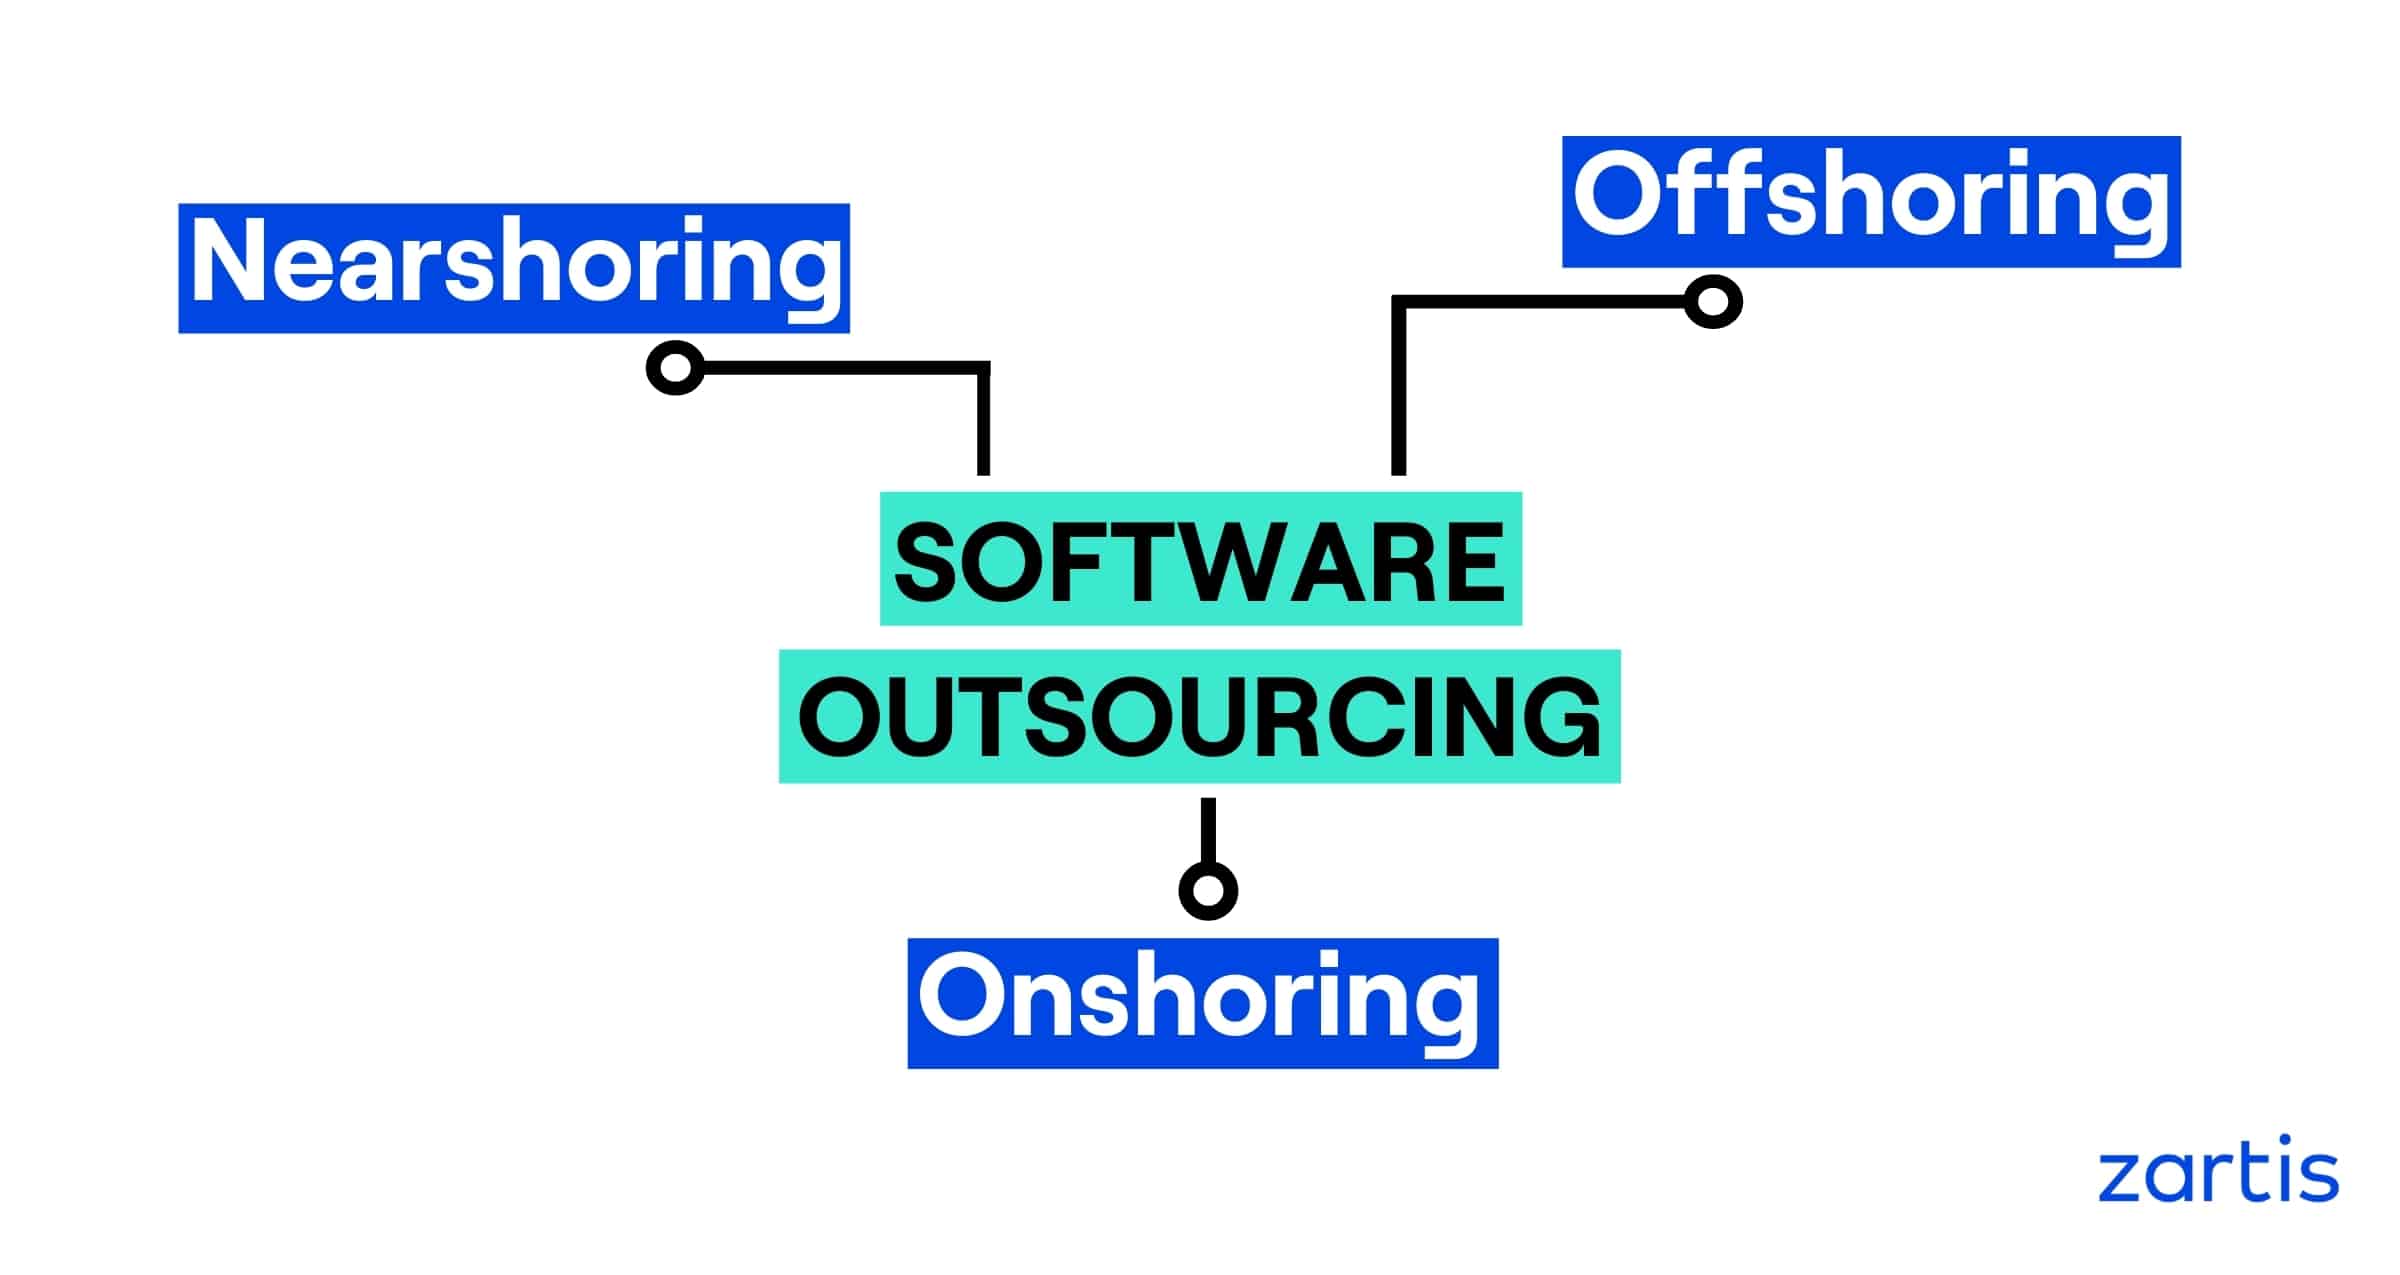 software outsourcing models and examples: nearshoring, offshoring and onshoring